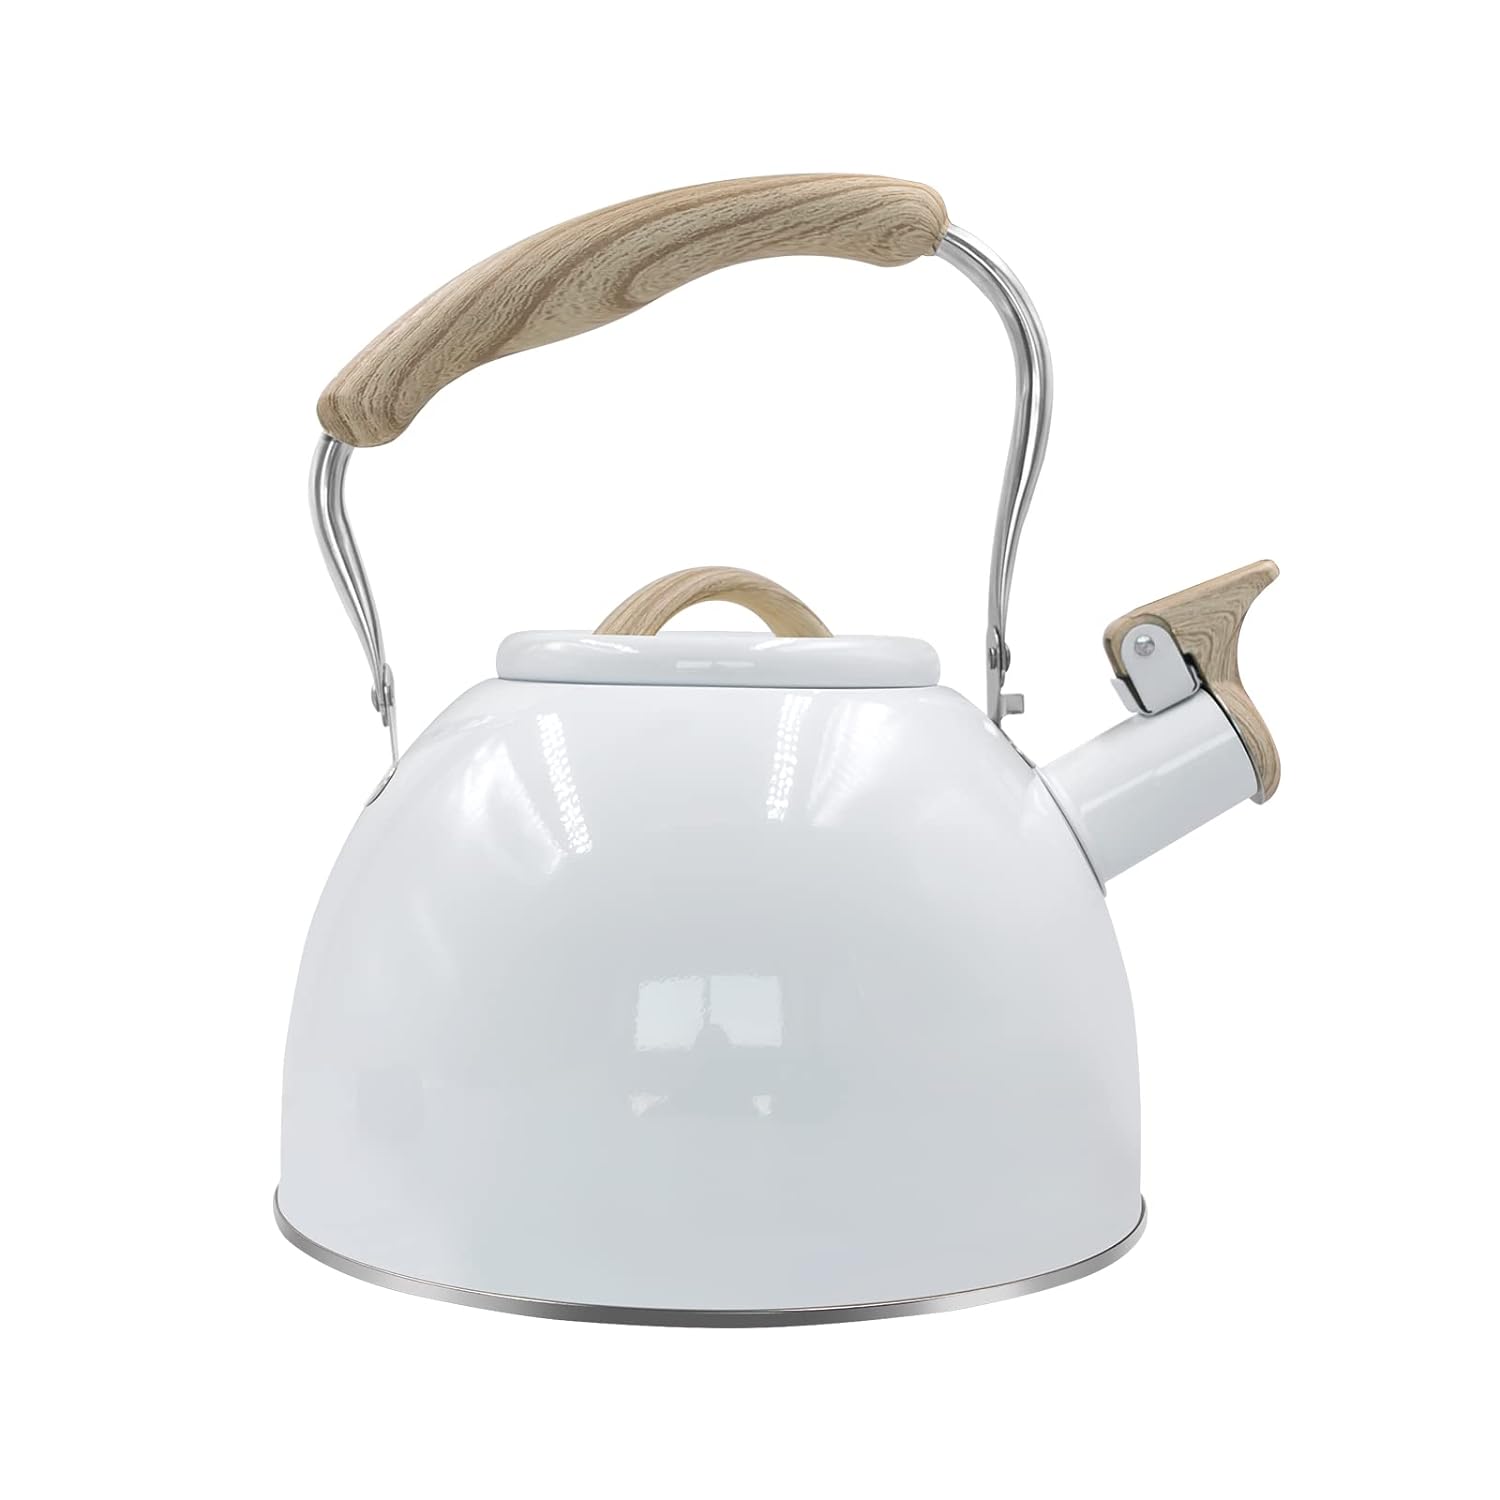 Great Choice Products Whistling Stovetop Tea Kettle, 2.6 Quart/3.0 Liter Stainless Steel Tea Kettles, Food Grade Tea Pots For Stove Top, Tea P…